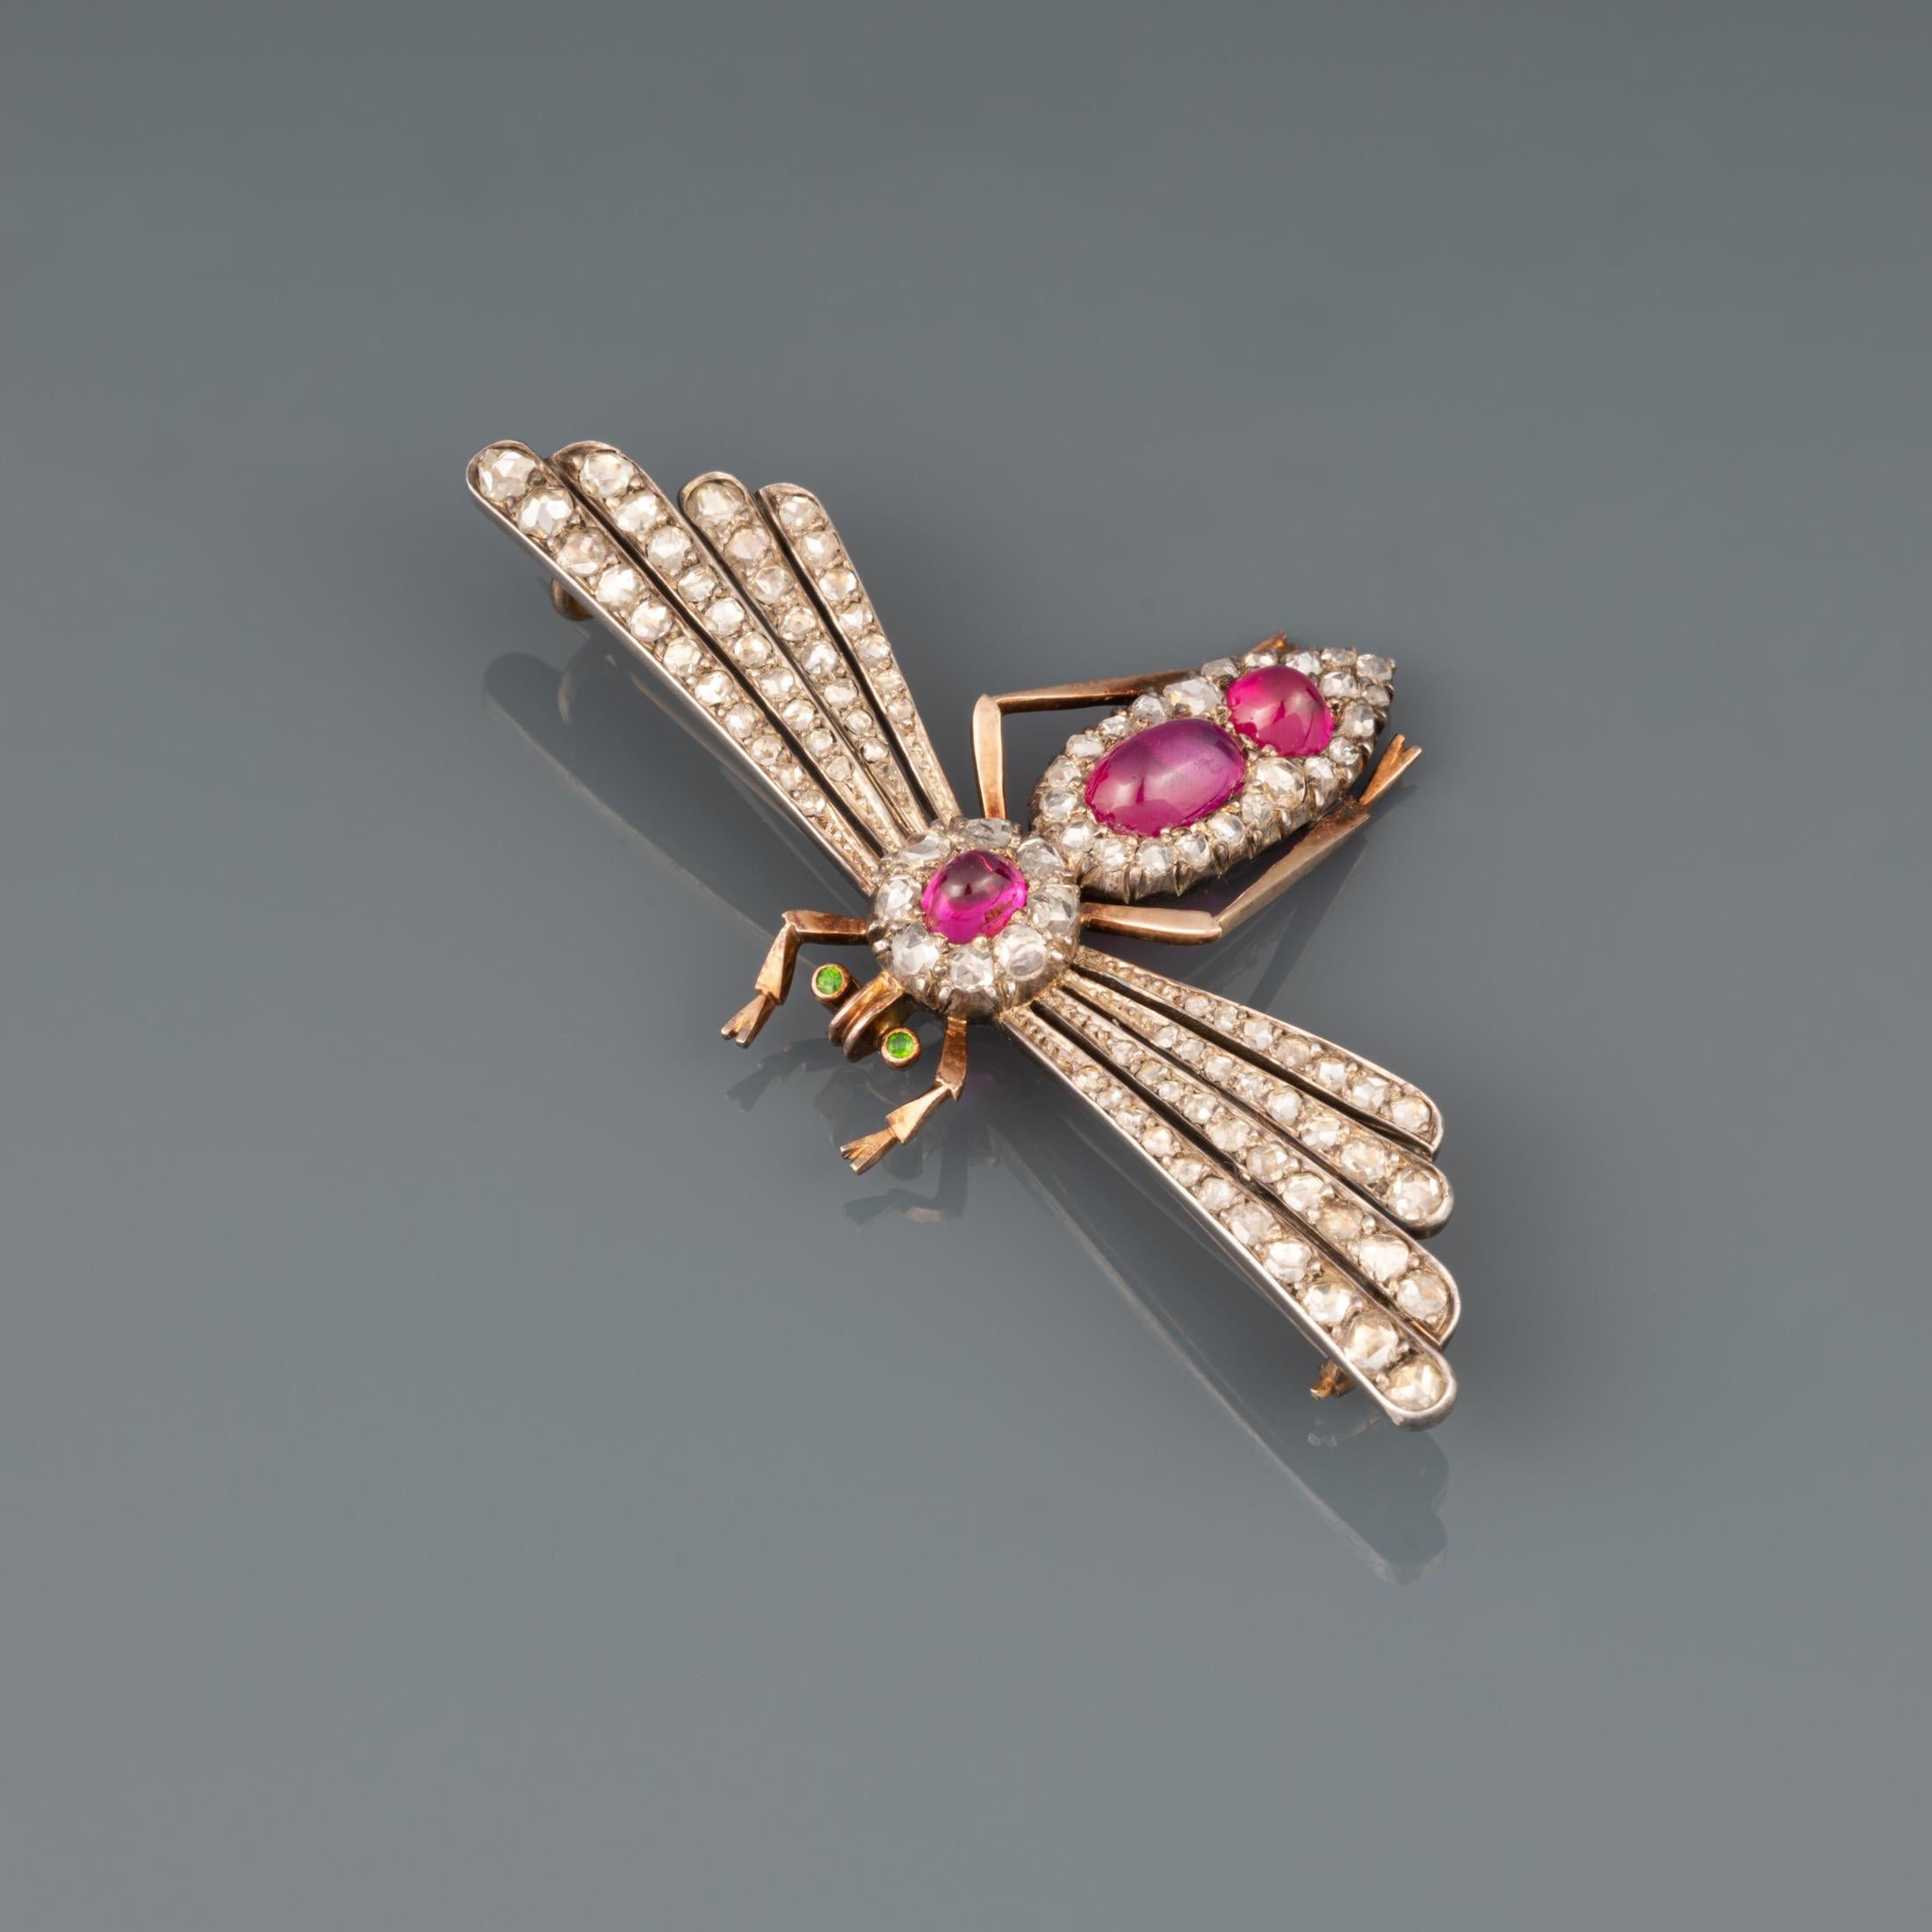 A very beautiful antique brooch, made in France circa 1870.

Made in rose gold 18k and silver. Hallmarks for gold: the eagle head.

The Rubys are natural, probably from Burma. Set with Rose curt diamonds.

Dimensions: 62 mm width, 38 mm